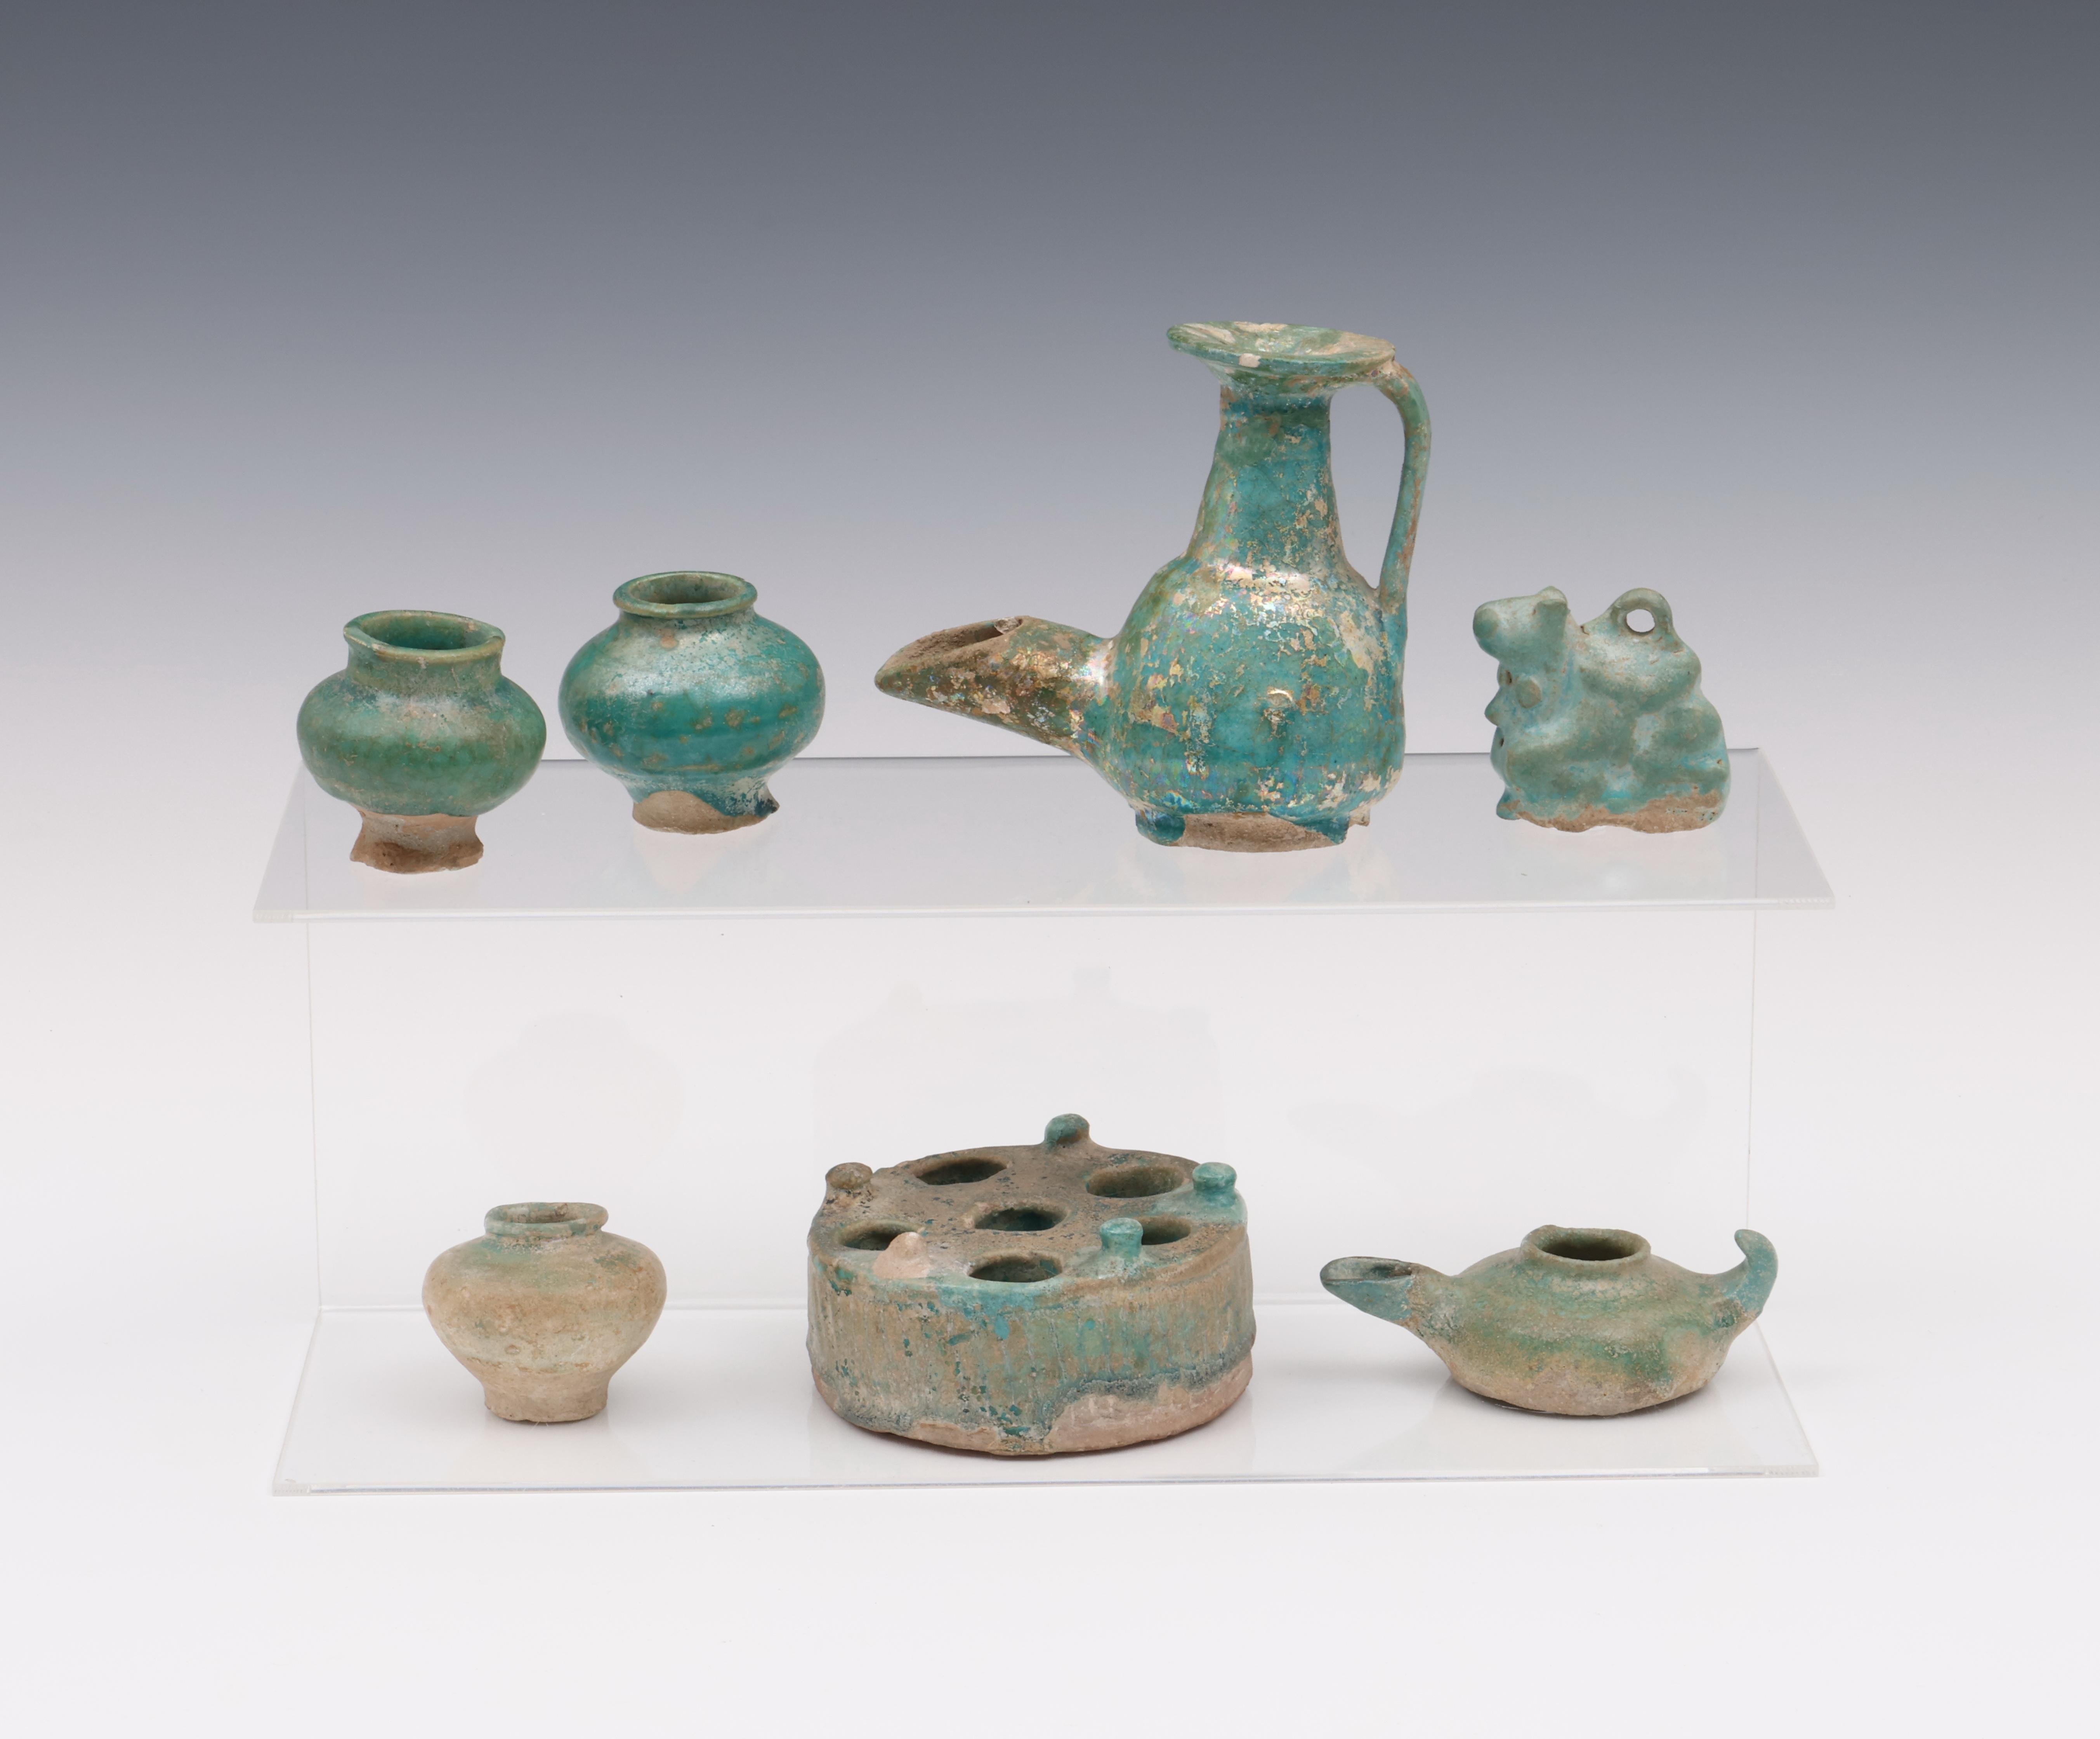 A collection of seven turkois glazed objects, Middle East, Persia 13th century and later; - Image 2 of 2